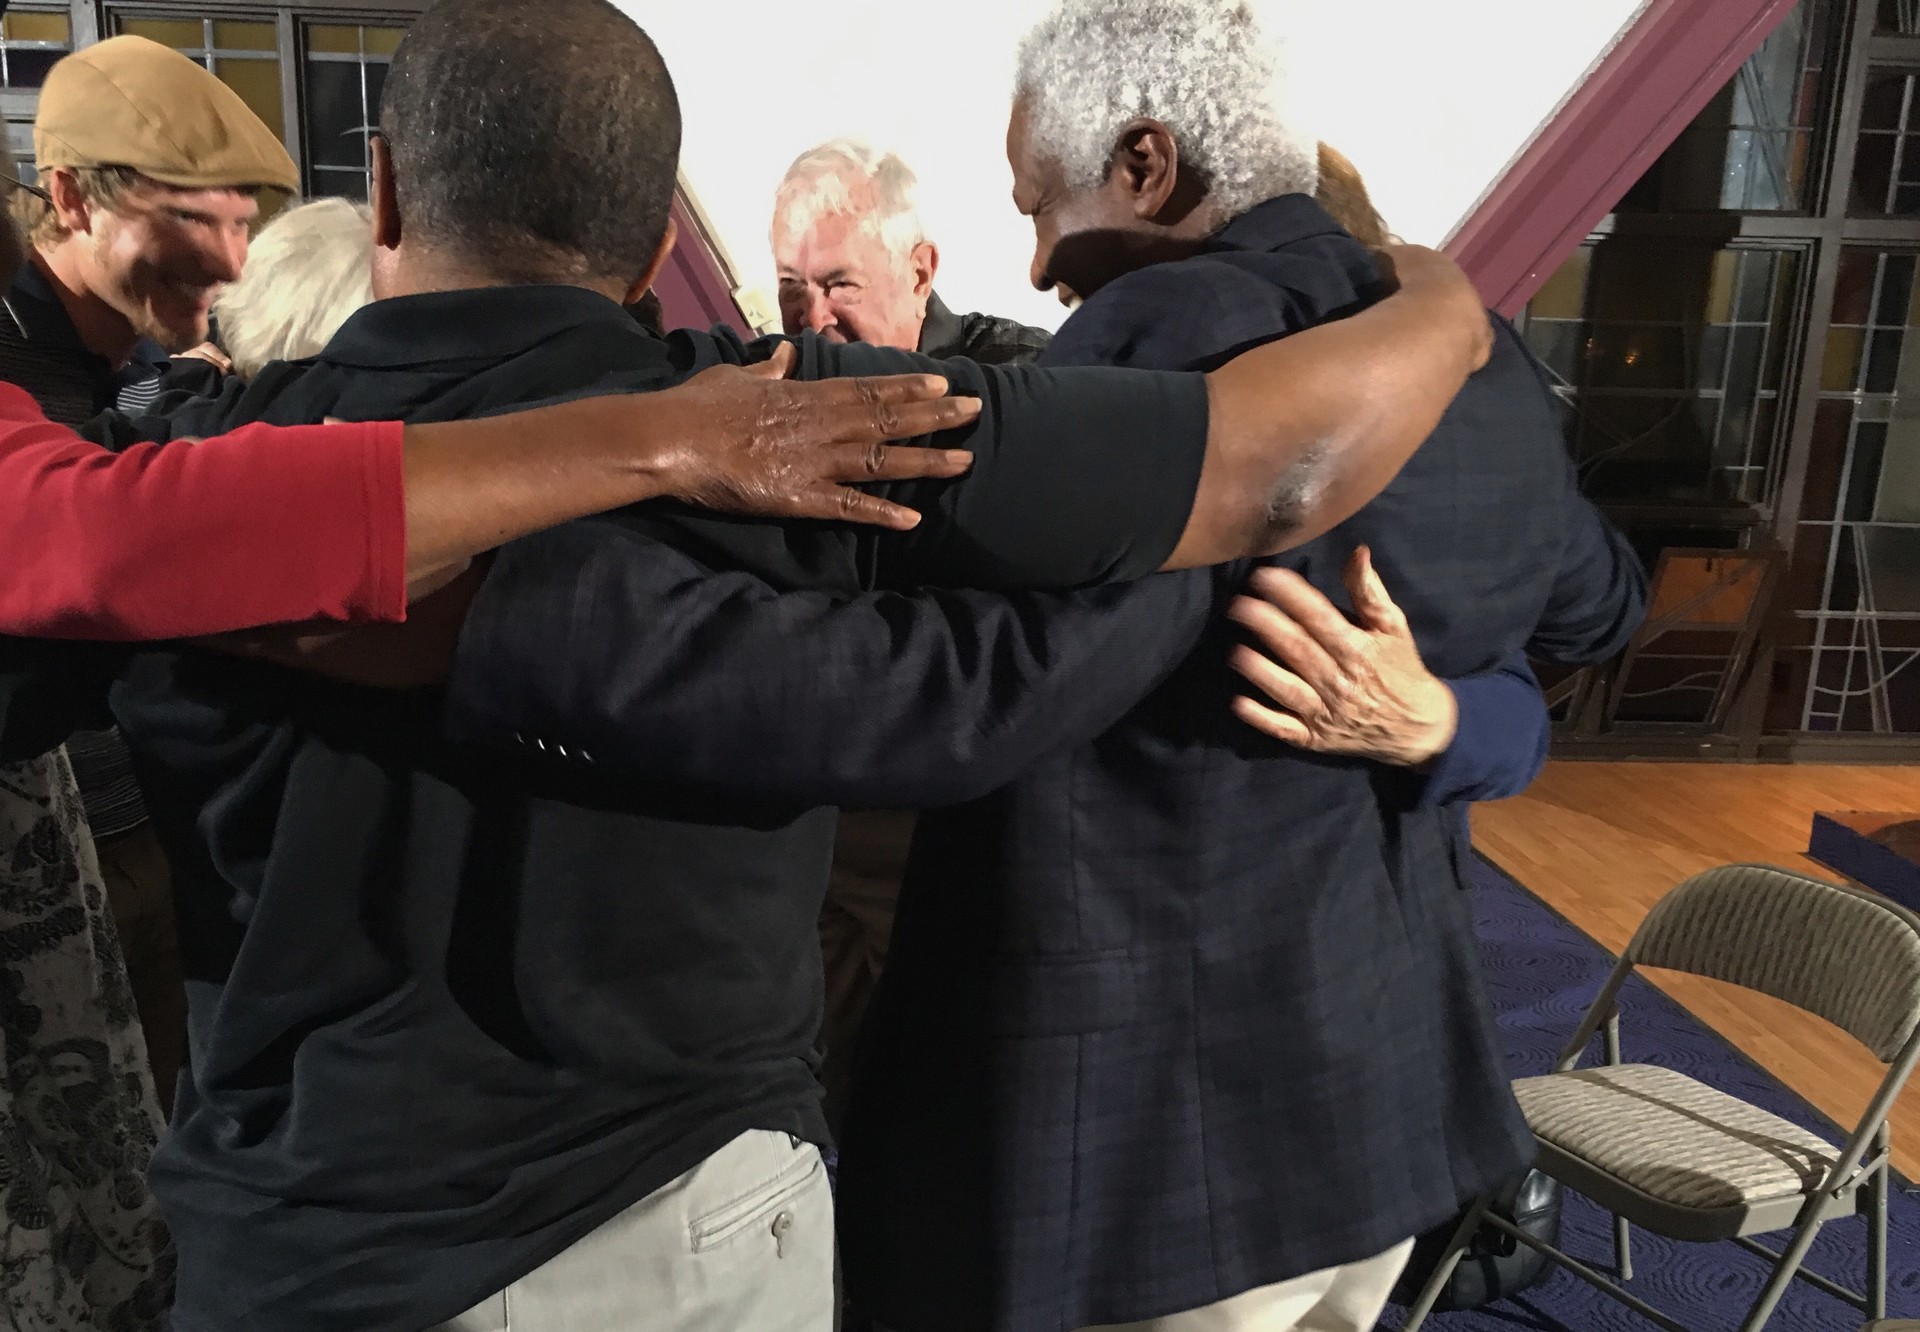 Racists Anonymous members hug after a meeting at a chapel in Sunnyvale. The diverse group includes a psychiatrist, preschool director, landscaper, and retired business executive.